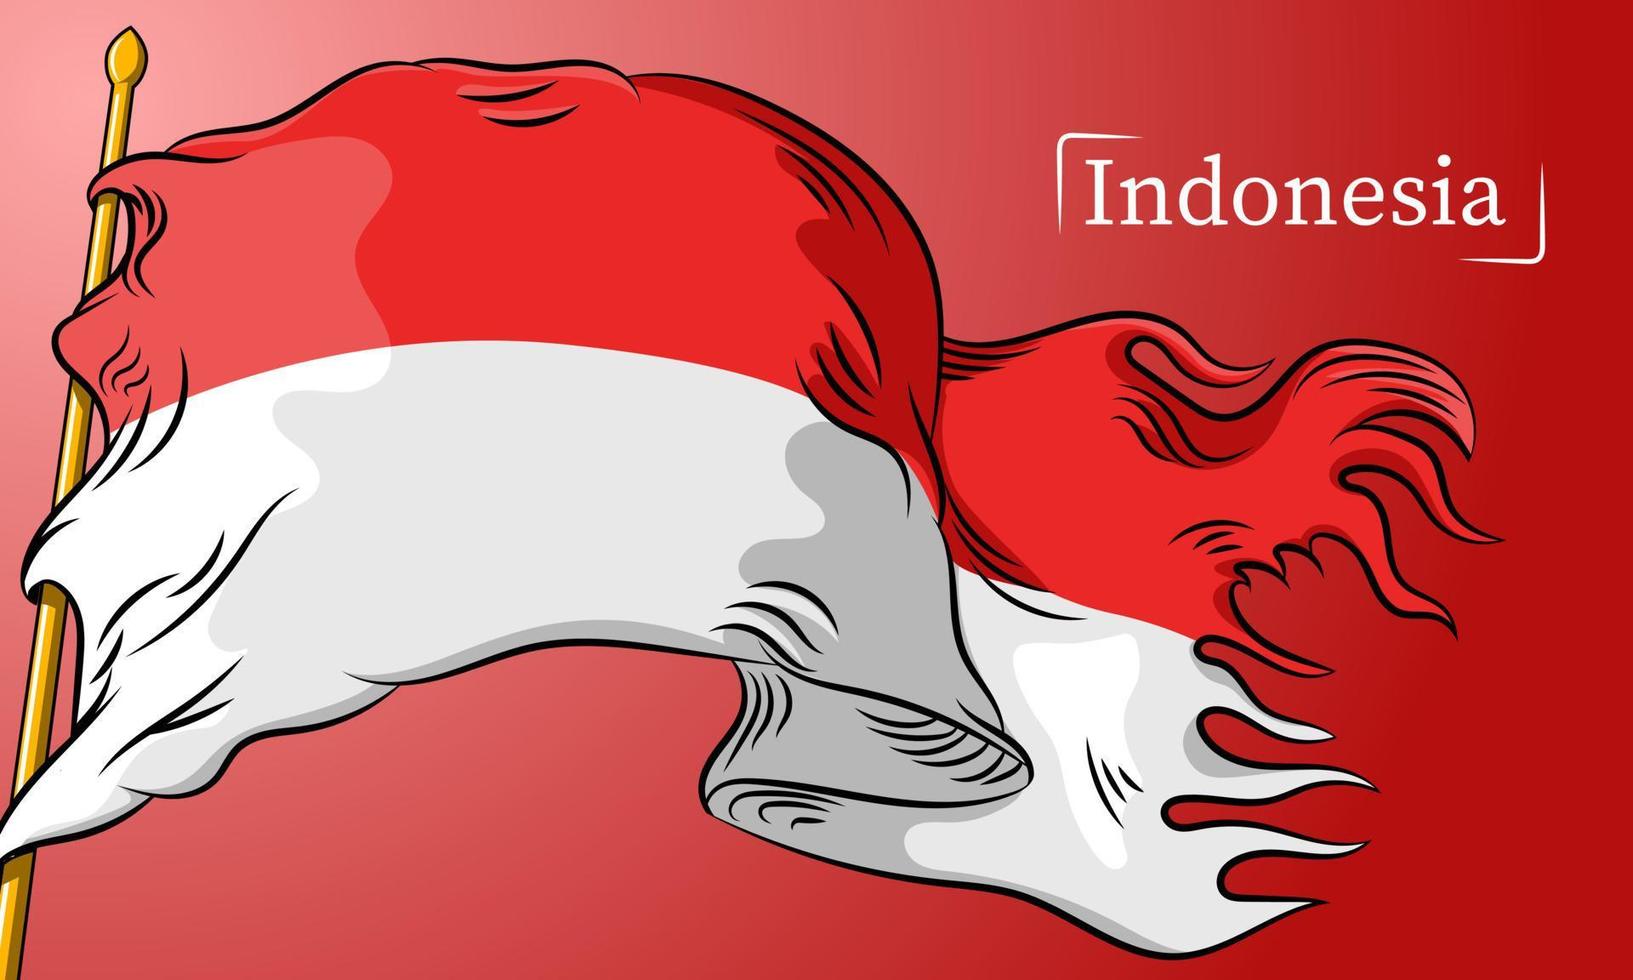 Amazing indonesian flag background vector with line style